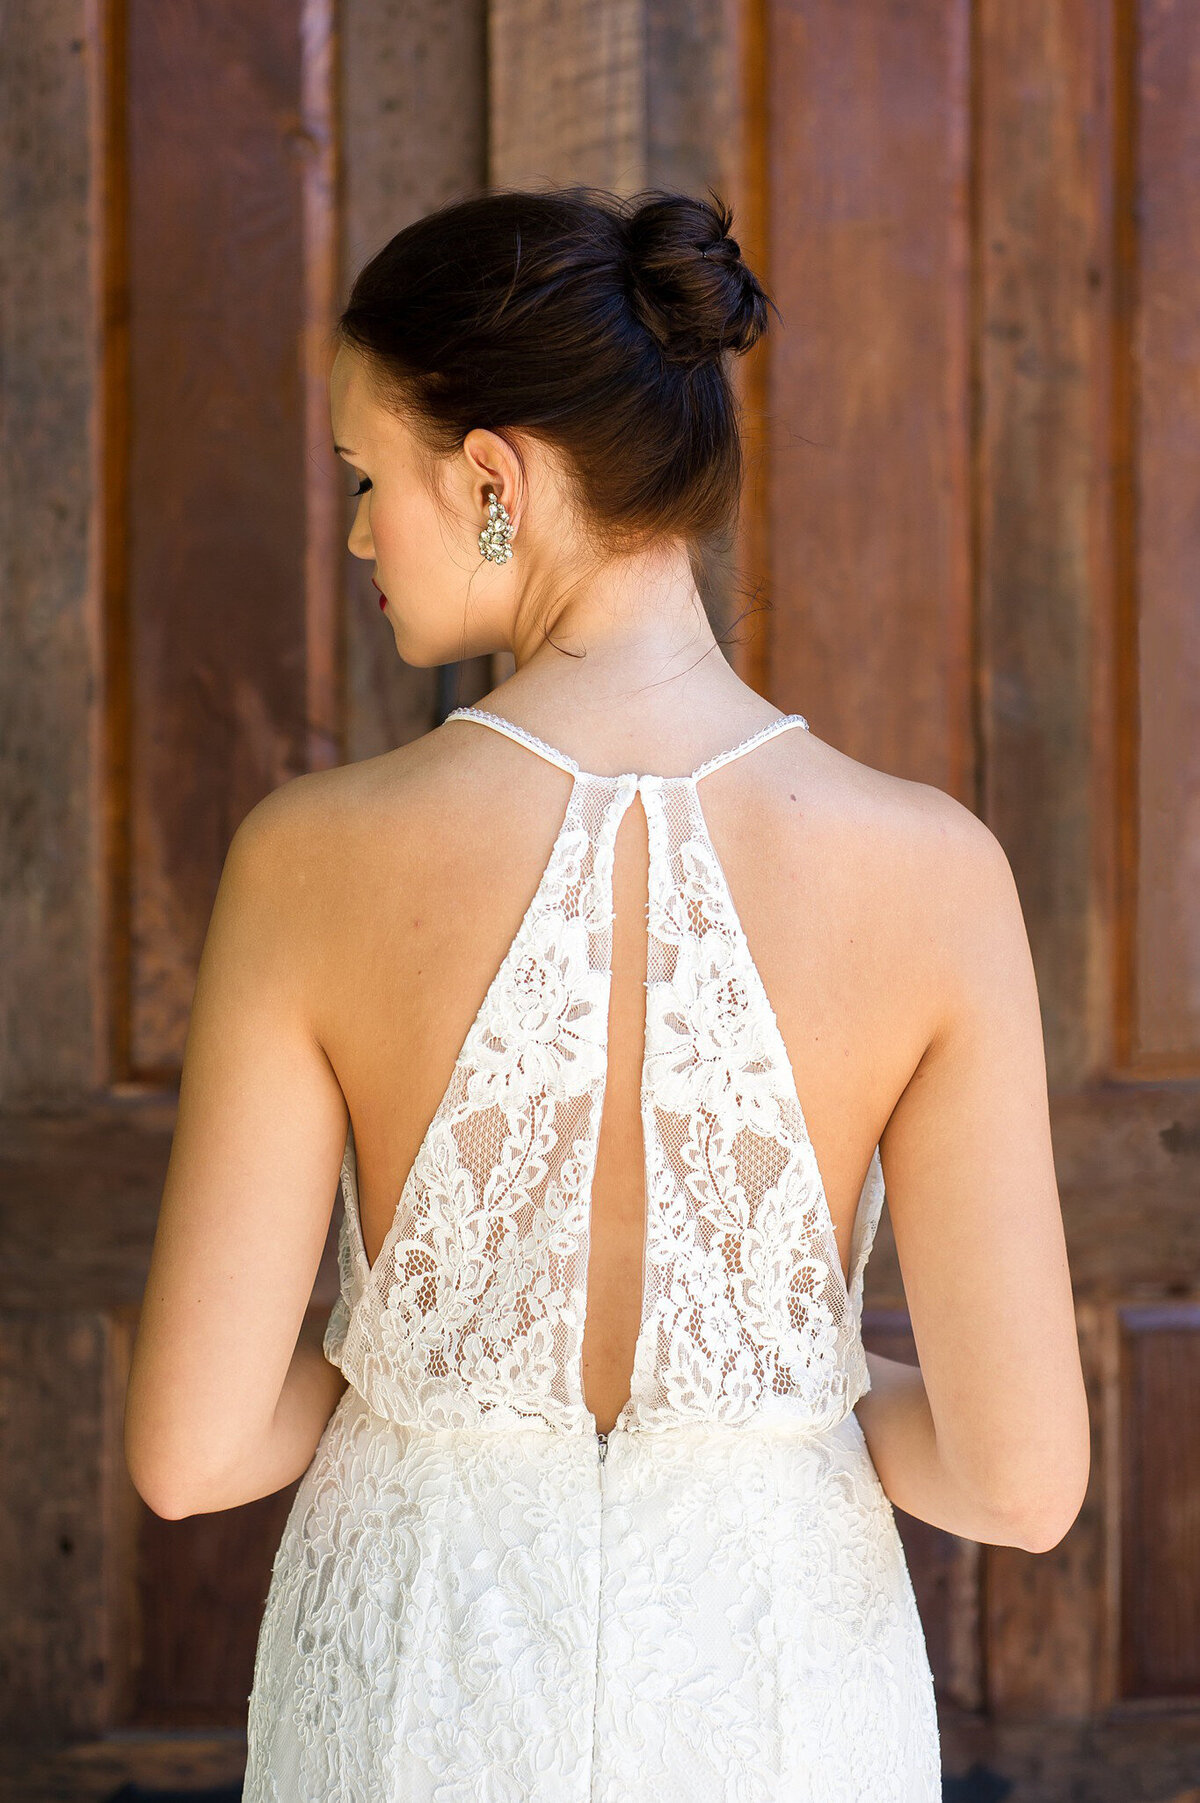 The sheer lace racerback of the Sabine wedding dress style has a bloused bottom and keyhole detail.